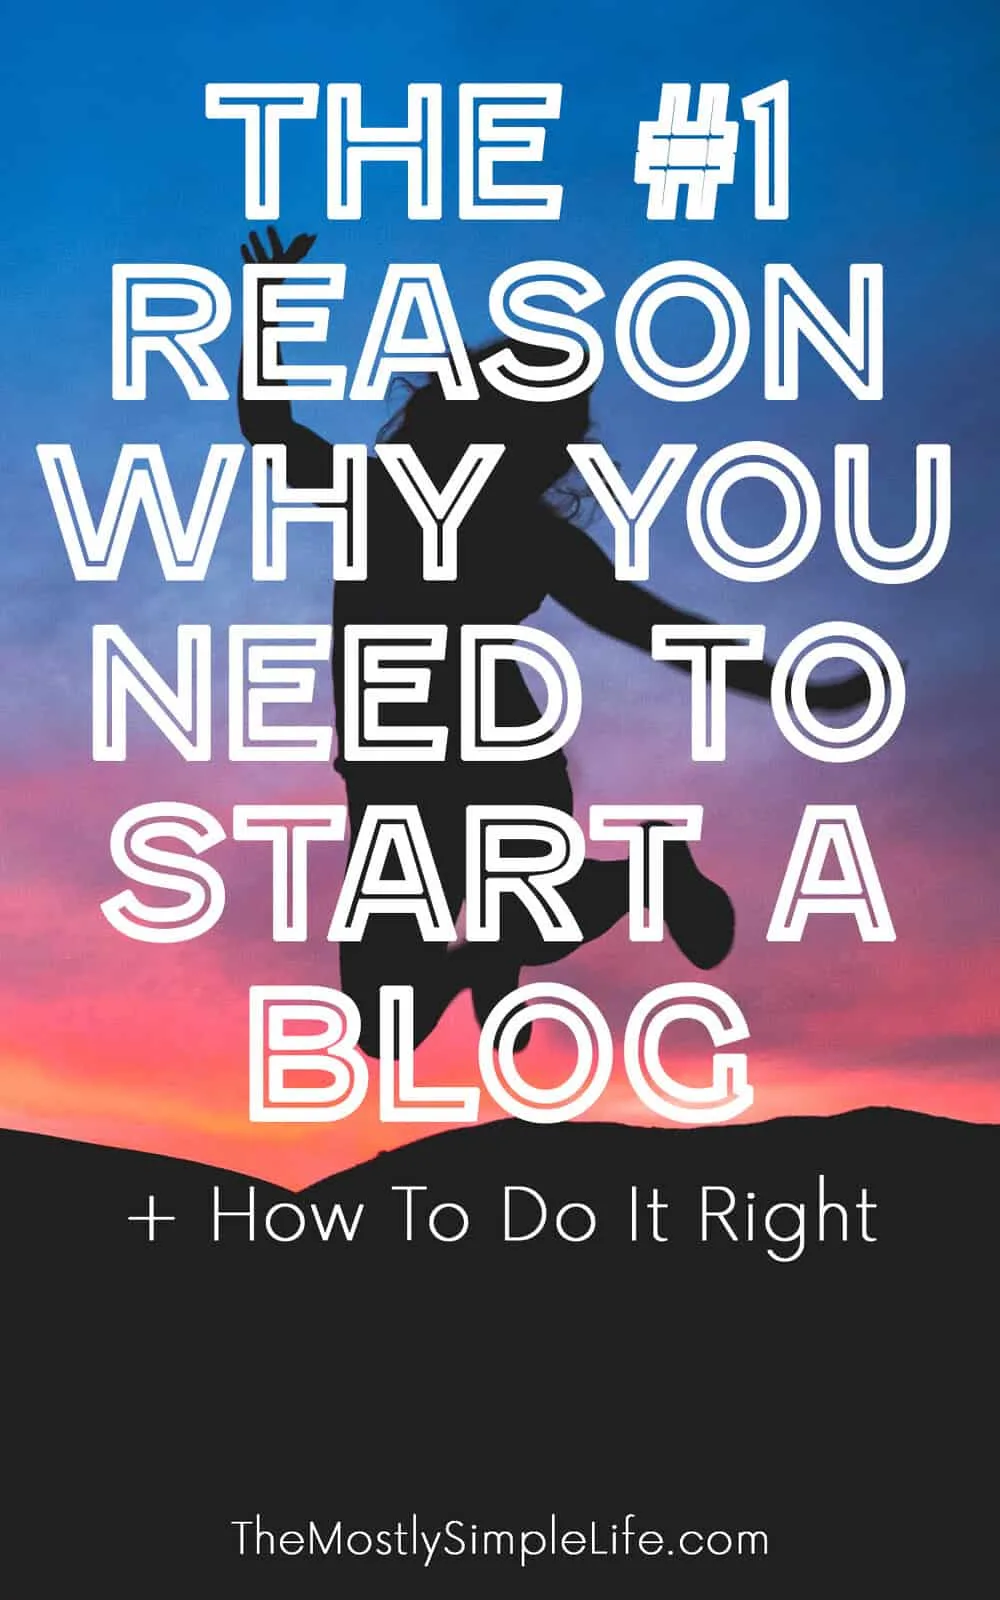 The #1 Reason Why You Need to Start a Blog + How To Do It